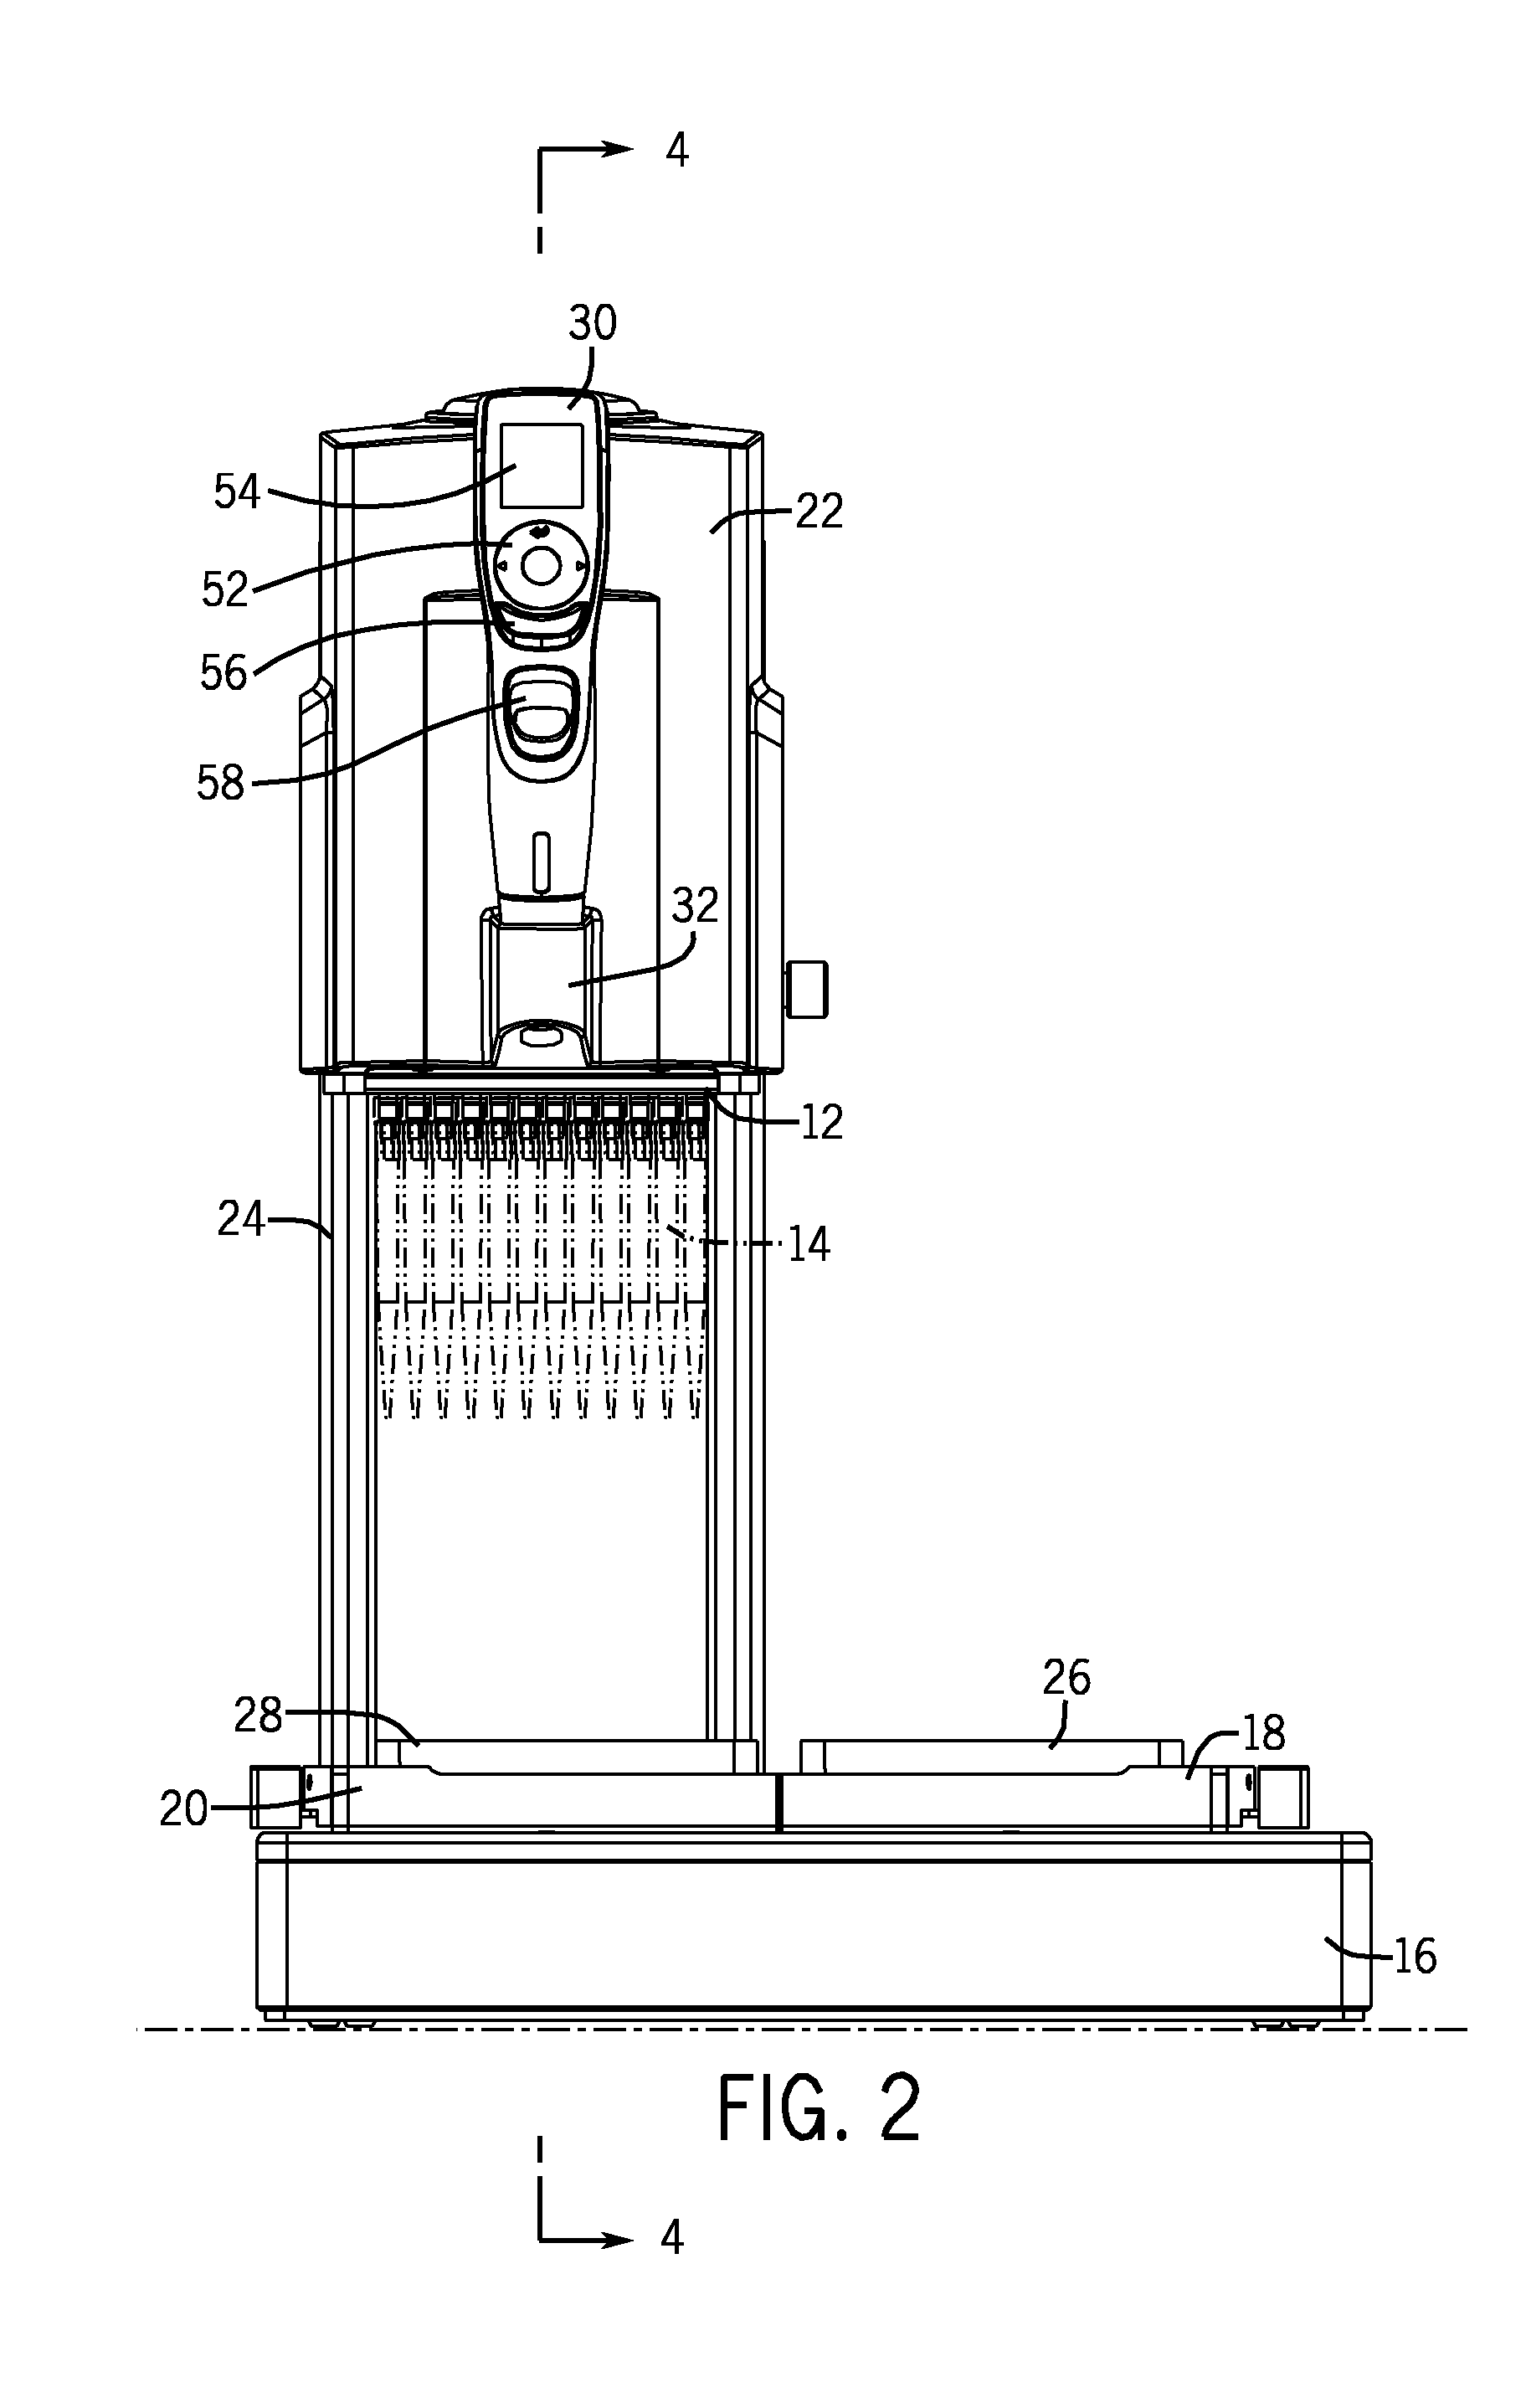 Unintended Motion Control For Manually Directed Multi-Channel Electronic Pipettor